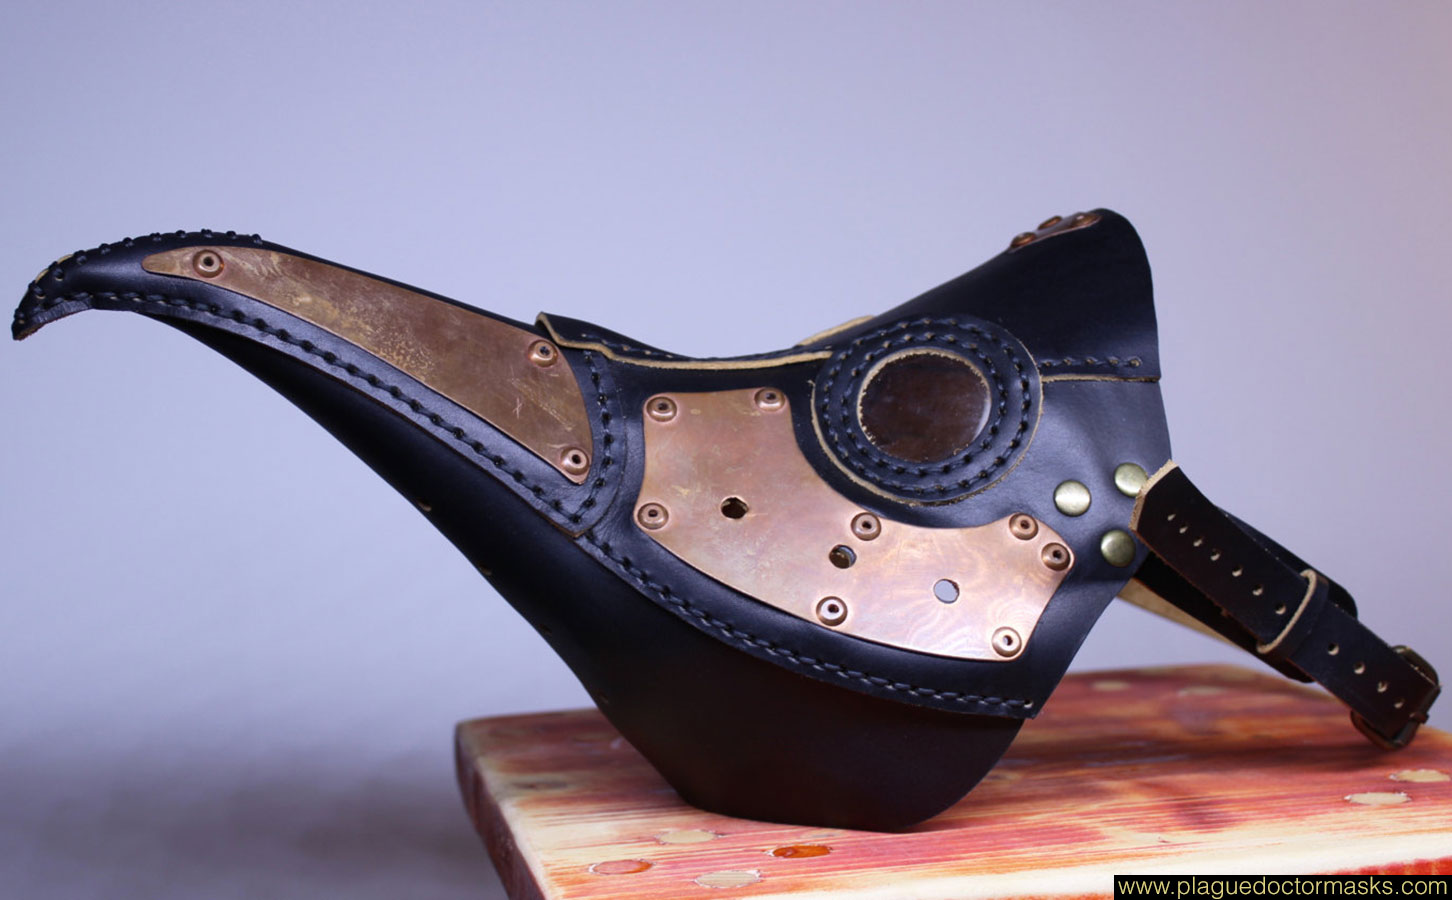 Steampunk Plague Doctor Mask Copper + Leather - Worldwide Shipping